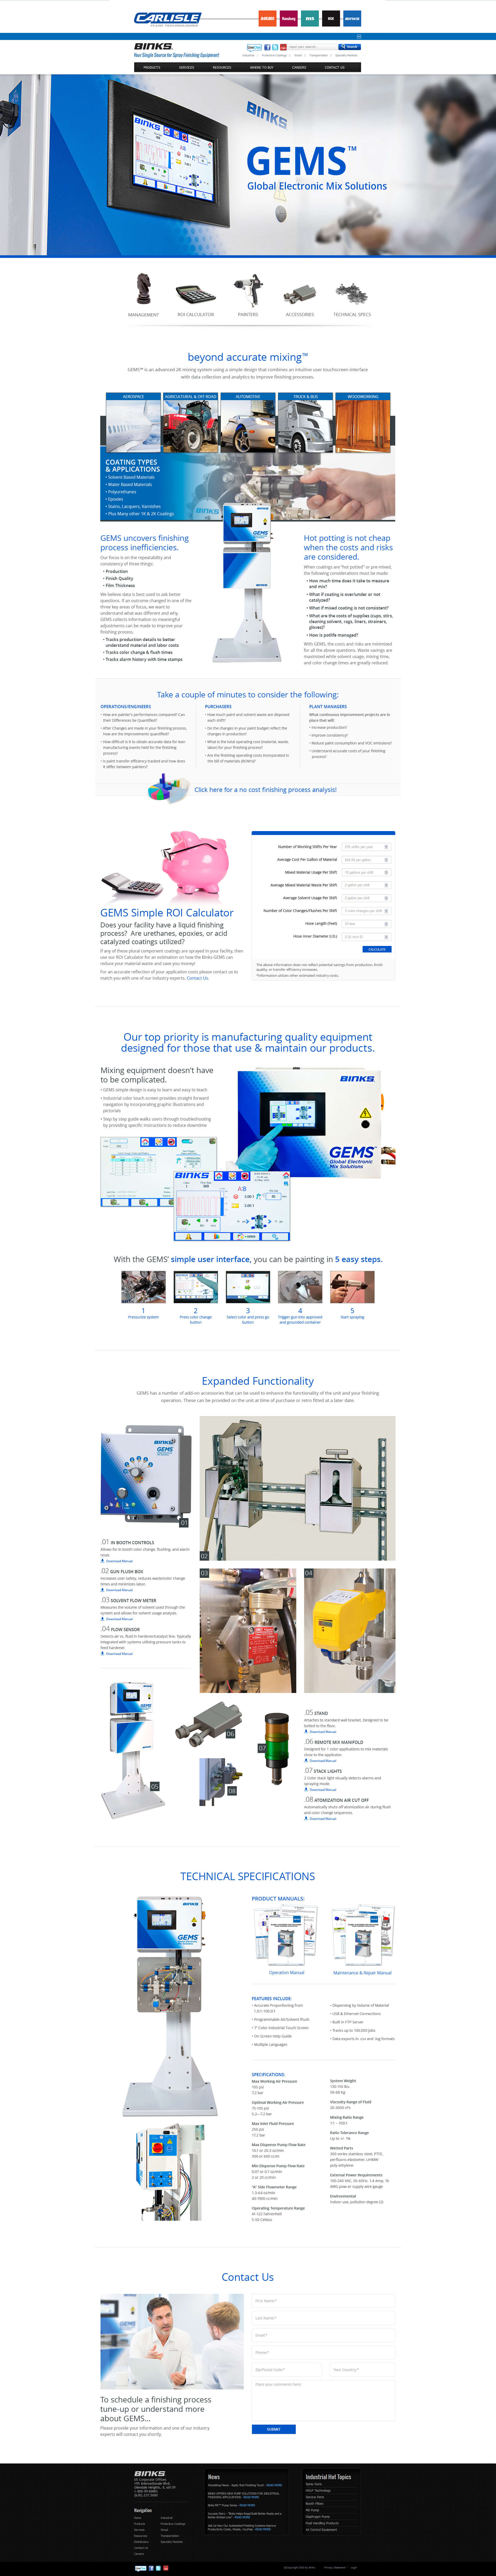 Example of the new and improved DNN website designed by Foremost Media for Carlisle Fluid Technology, Binks.